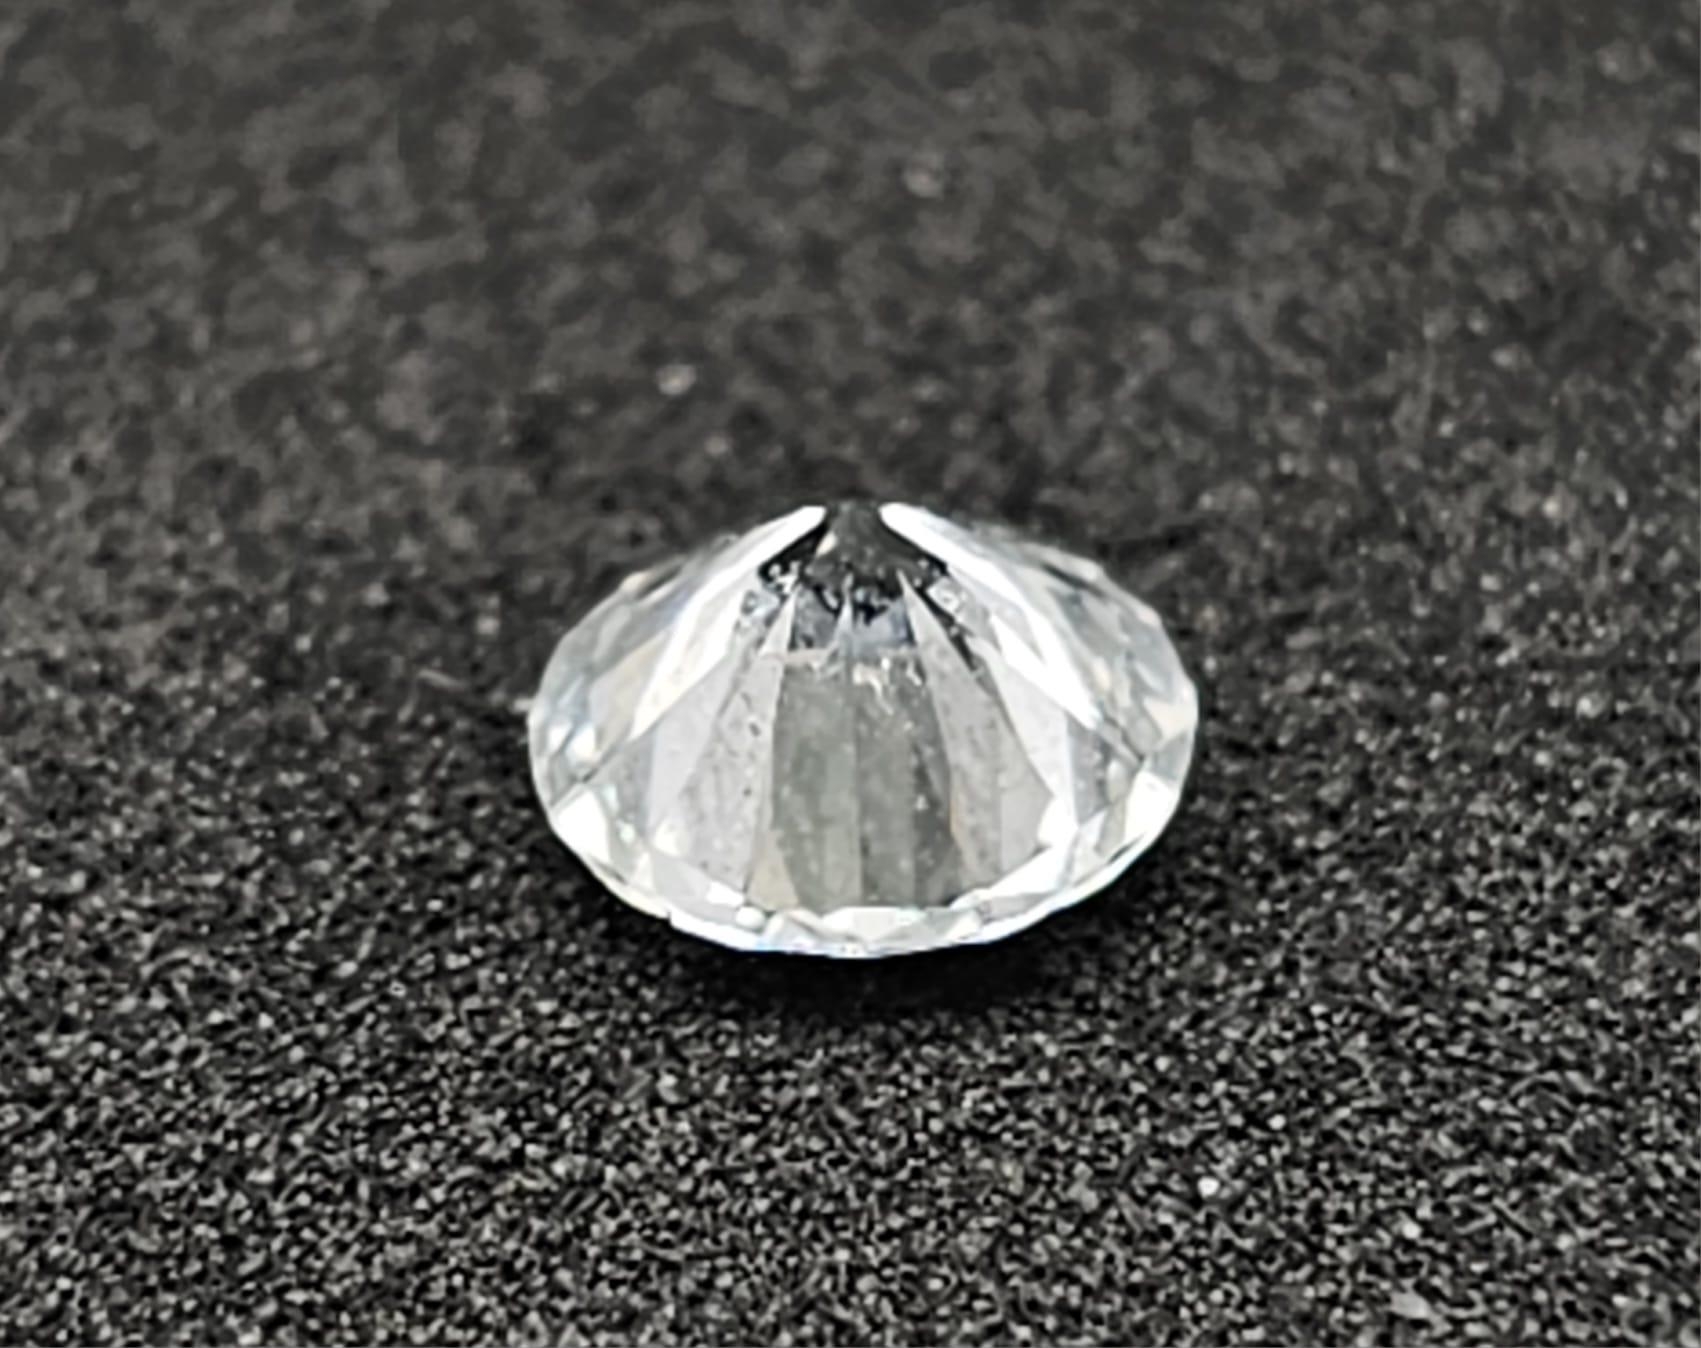 GIA CERTIFIED ROUND BRILIANT CUT DIAMOND. 0.70CT D FLAWLESS GIA CERT INCLUDED 2106881353 - Image 2 of 4